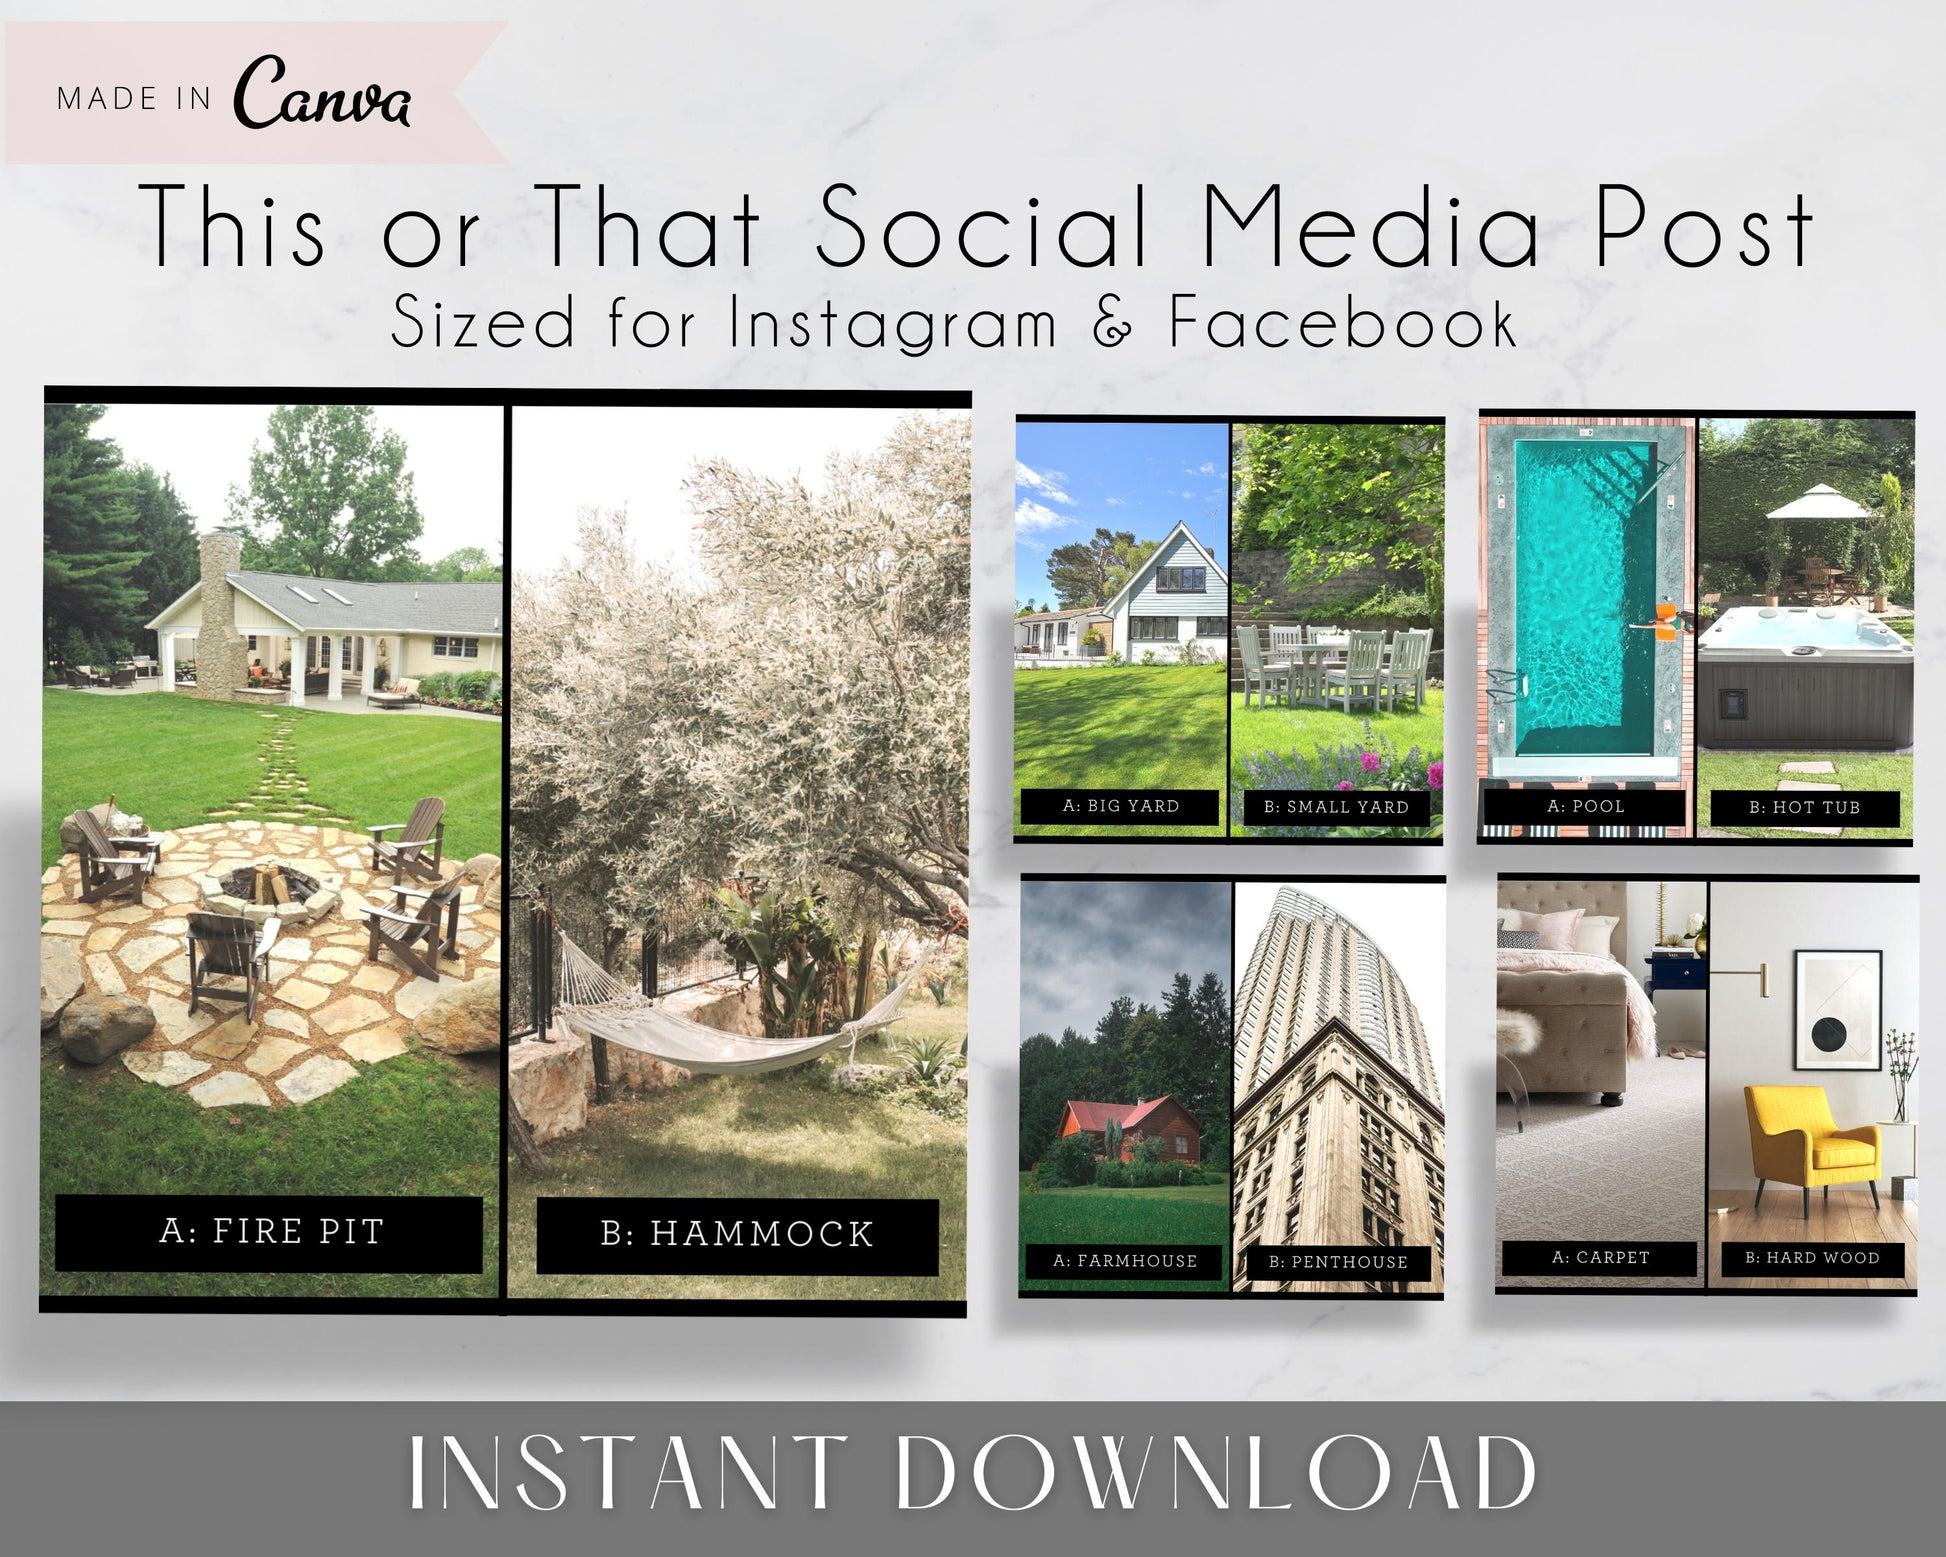 Real Estate This or That Social Media Posts for Real Estate Agents, Realtors to use on Facebook or Instagram - Instant Download - Made in Canva